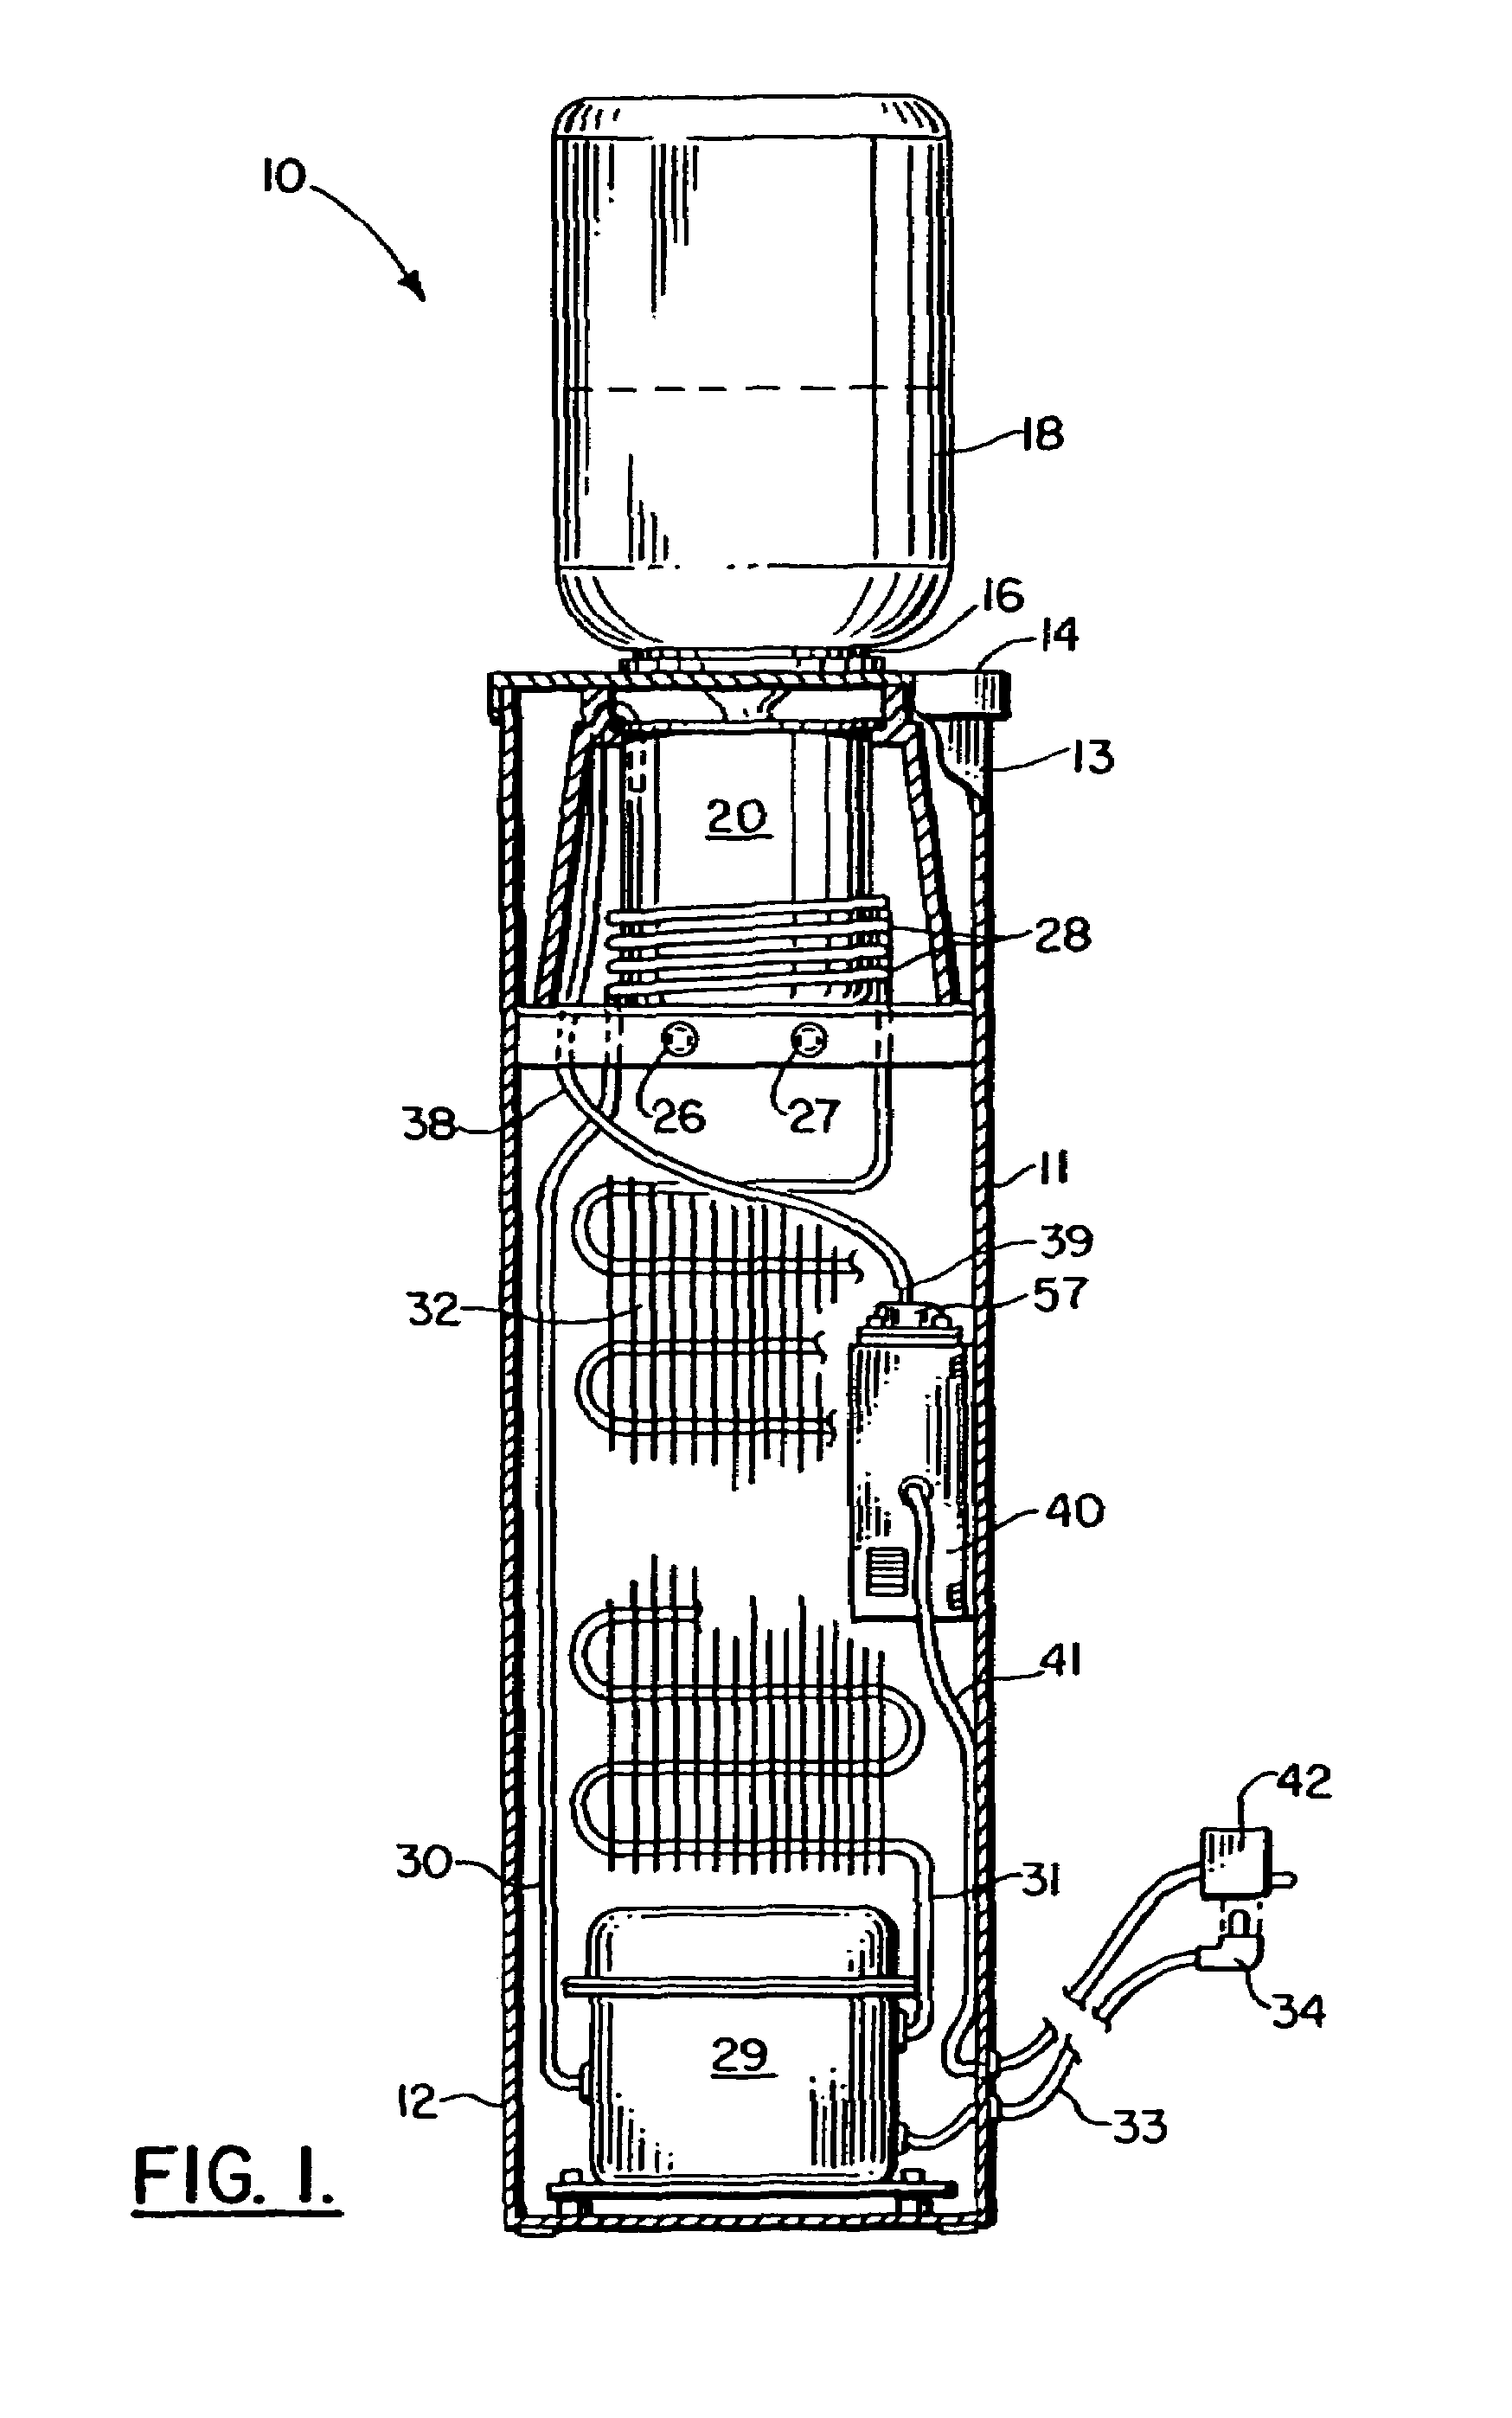 Method and apparatus for disinfecting a refrigerated water cooler reservoir